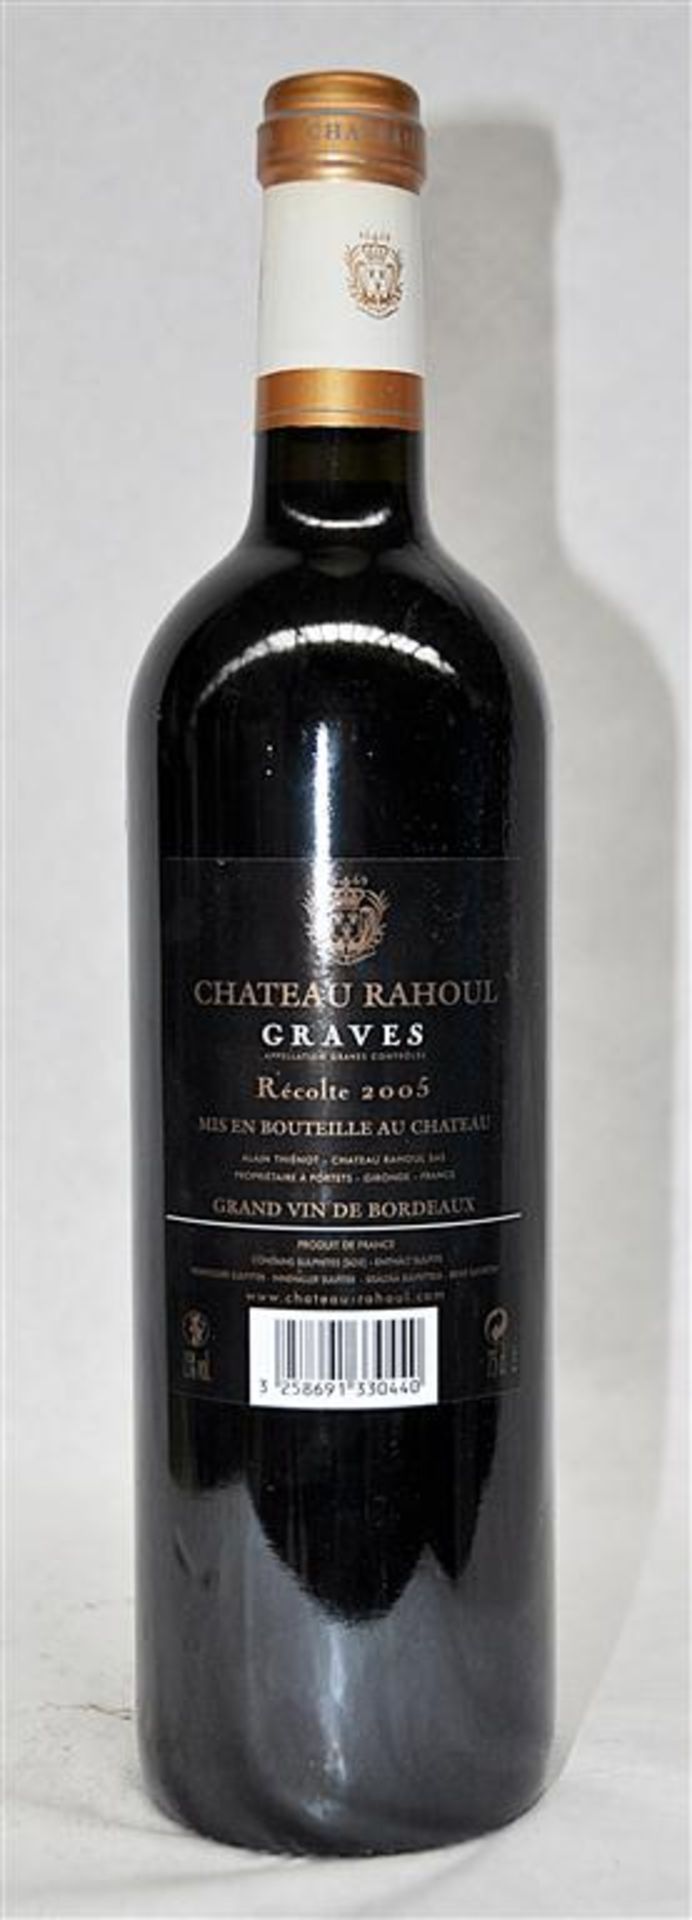 1 x Chateau Rahoul Graves Recolte Red Wine - French Wine - Year 2005 - Bottle Size 75cl - Volume 13% - Image 2 of 3